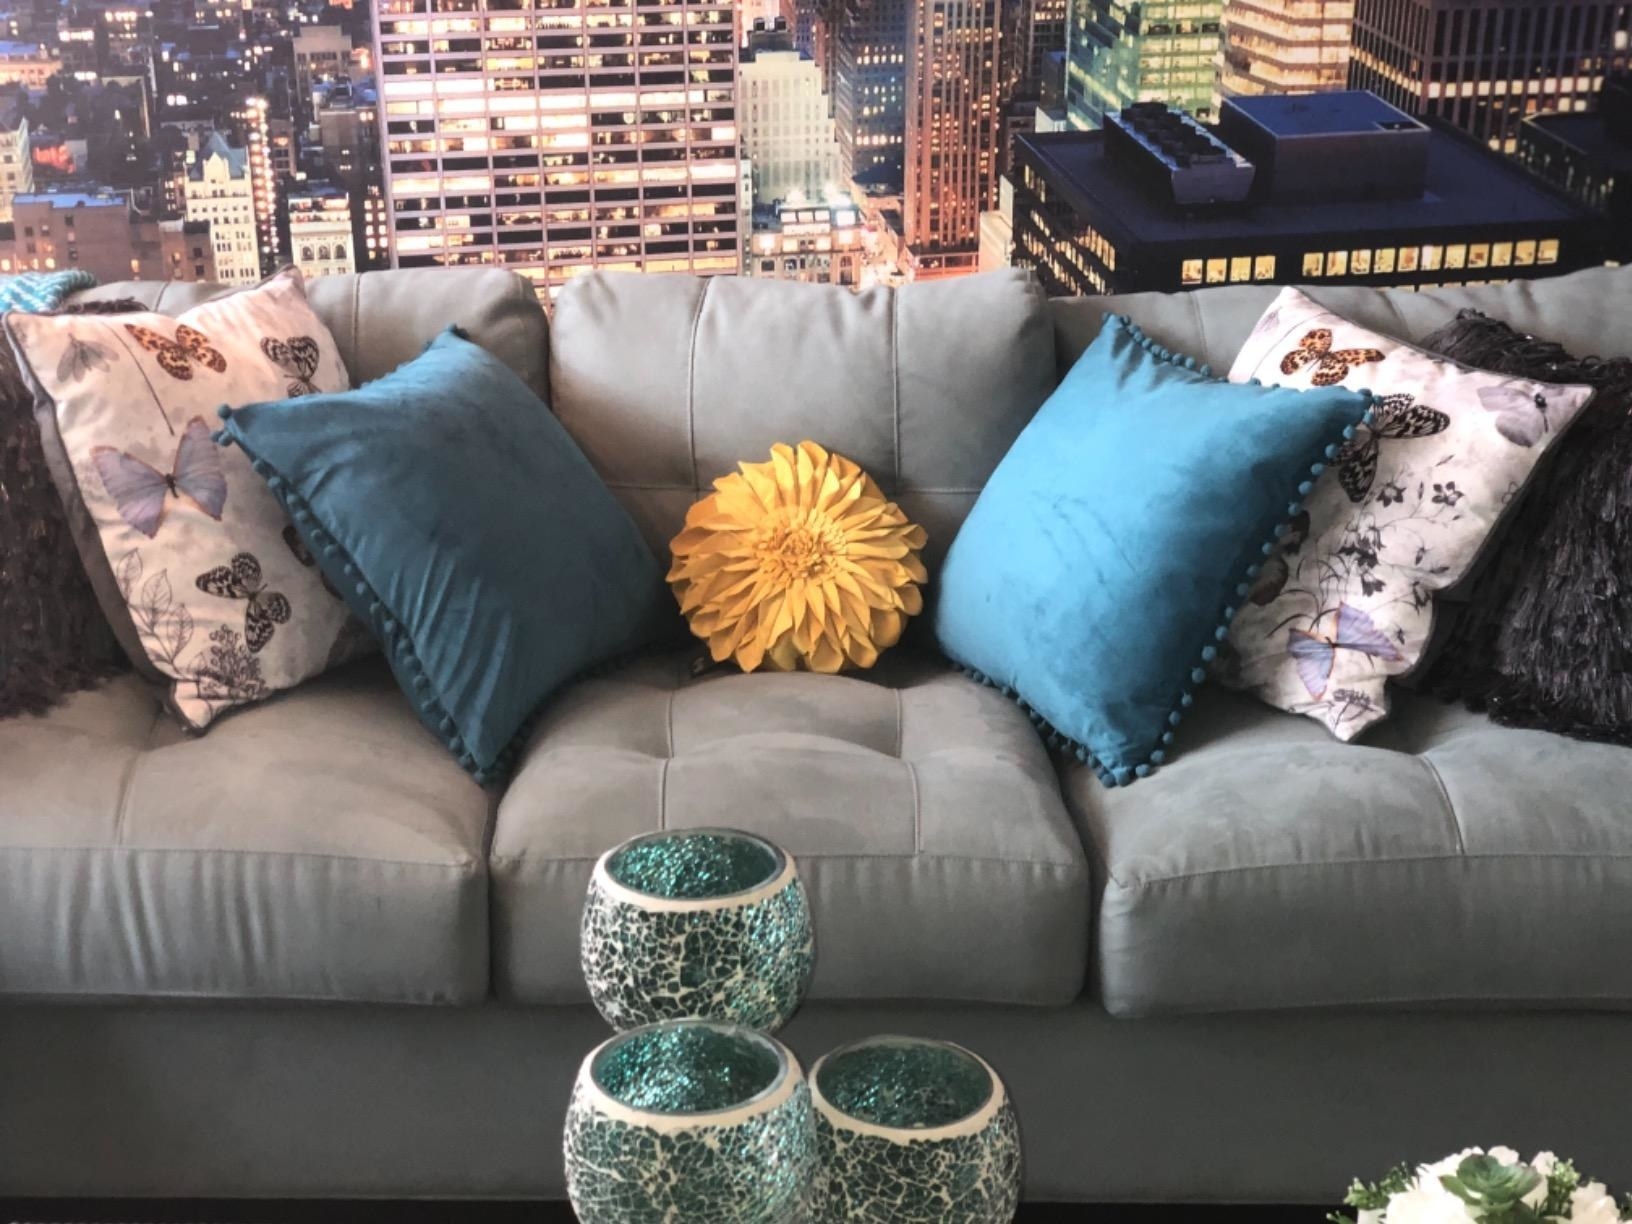 Sunflower accent pillow wedged in between blue pillows and butterfly-pattern pillows on a light gray couch